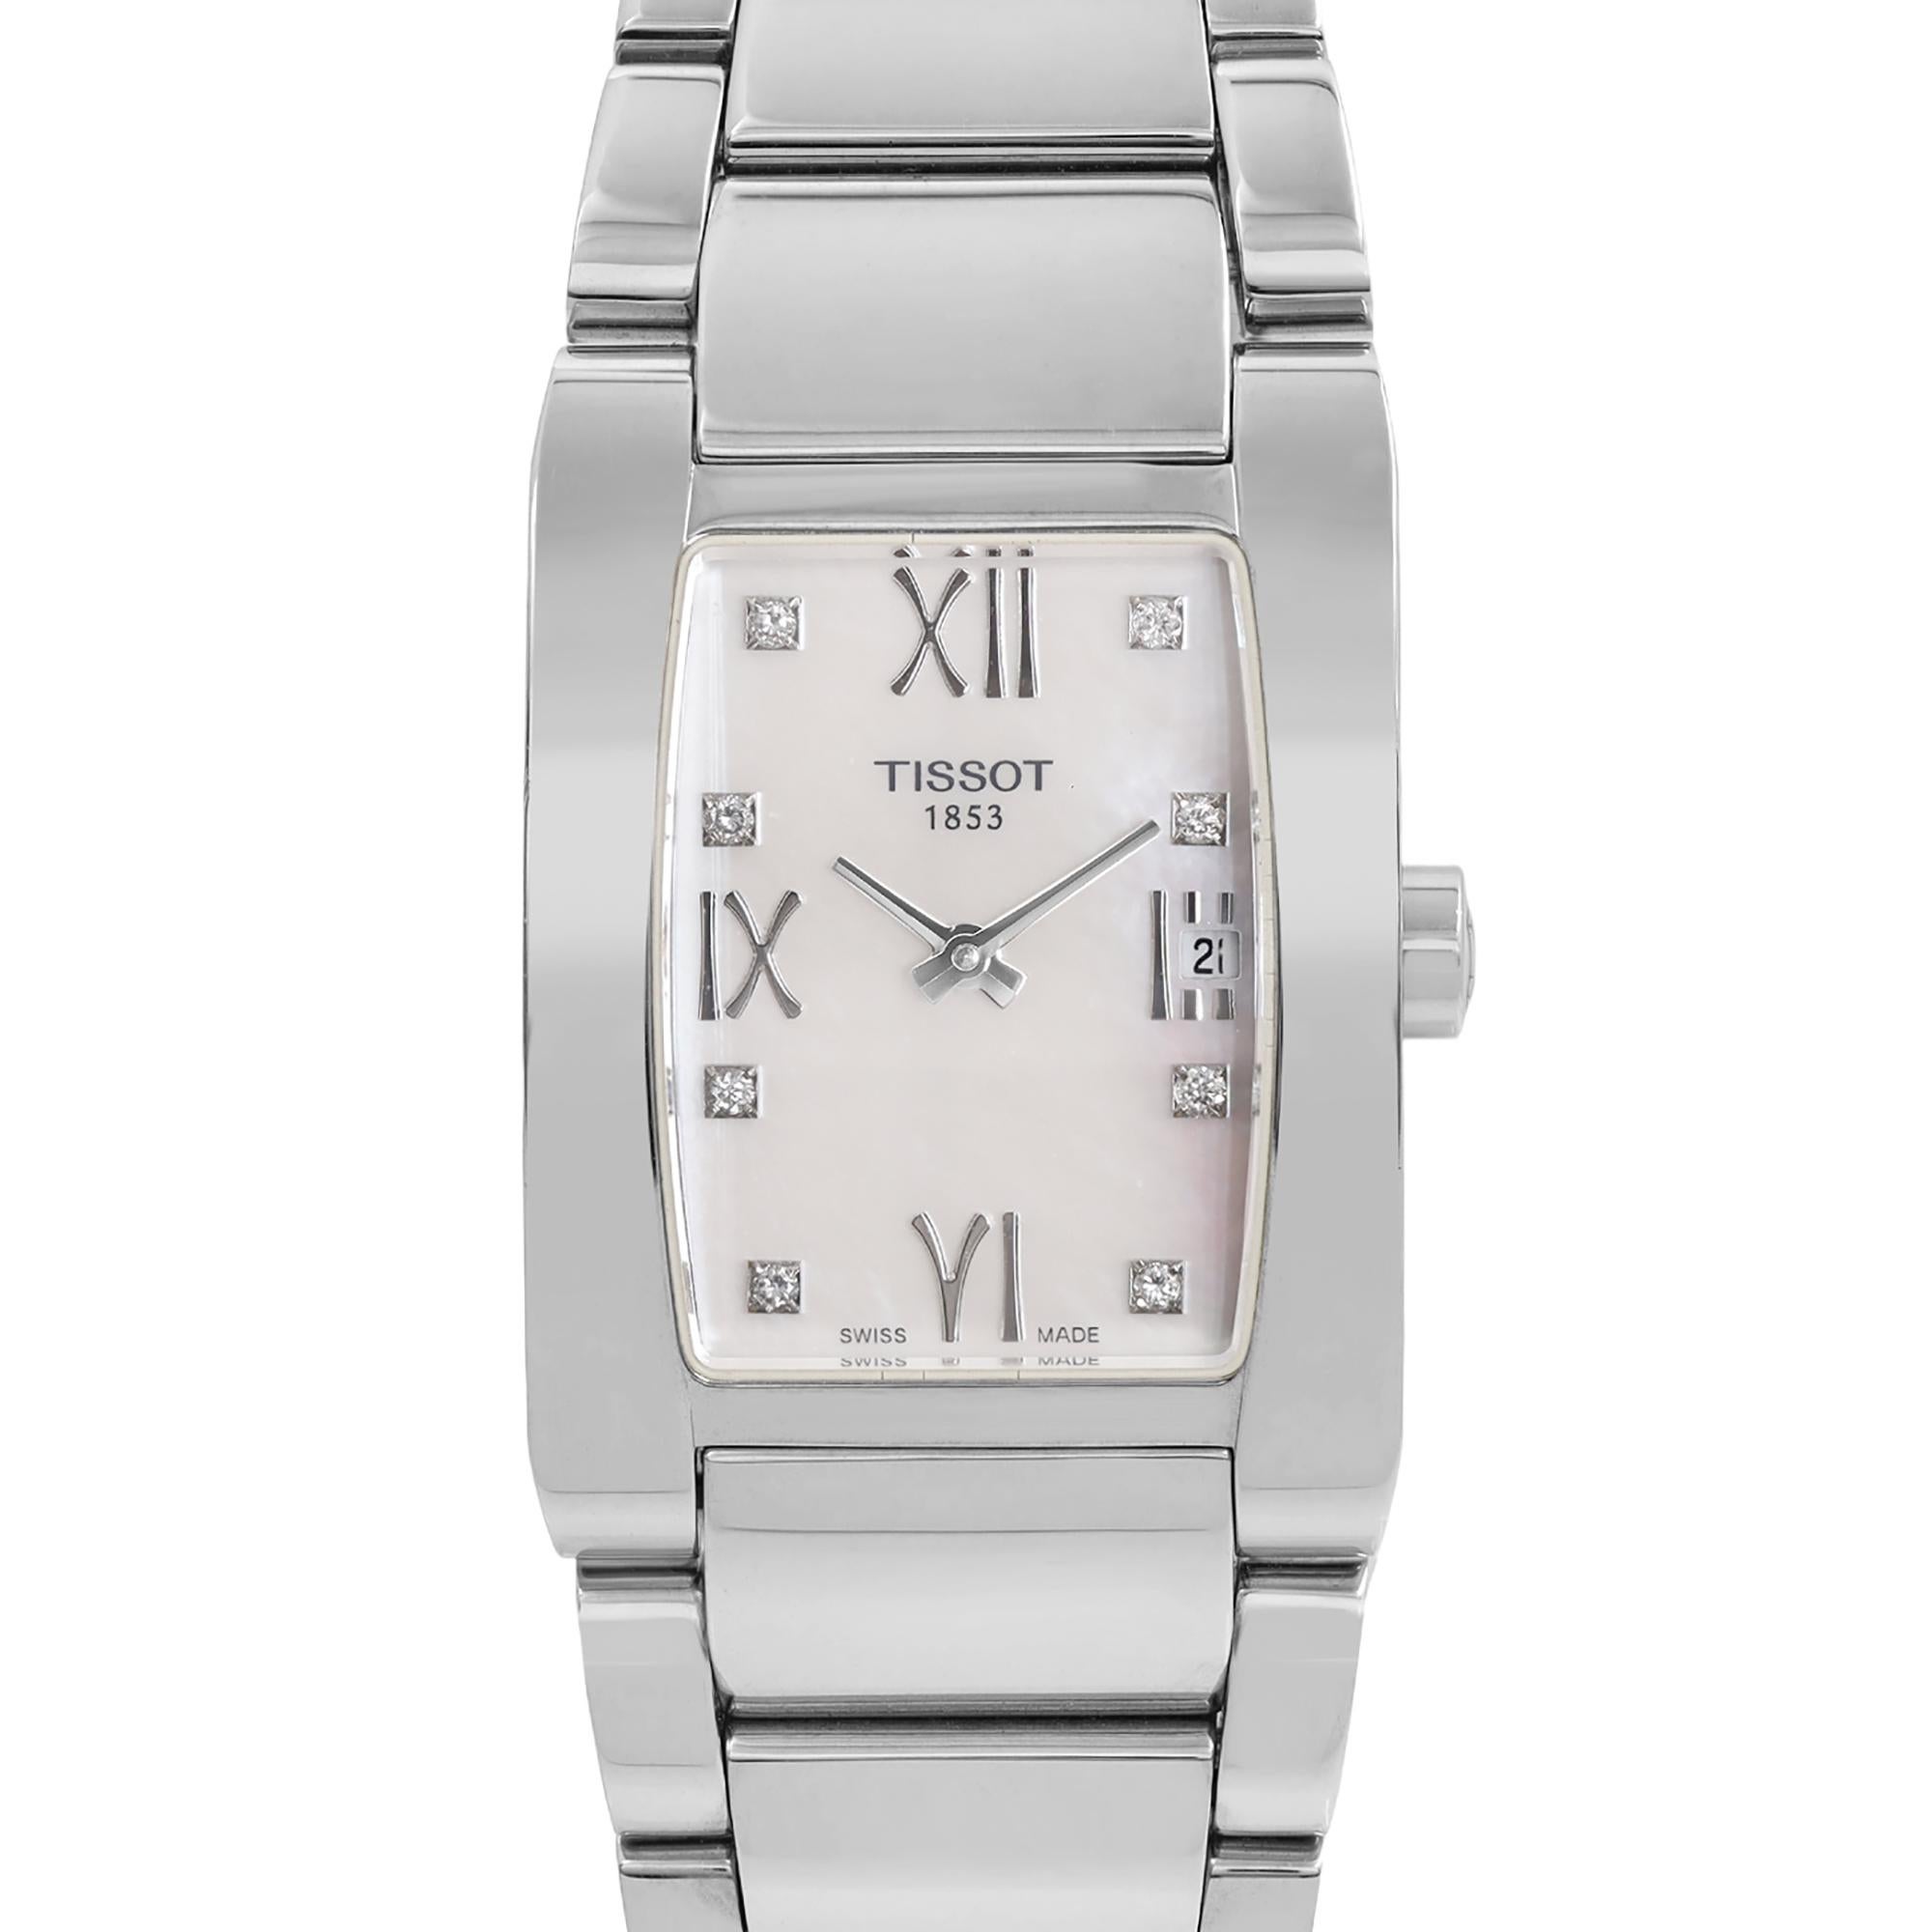 Display Model Tissot Generosi-T Ladies Watch T007.309.11.116.00. This Beautiful Timepiece is Powered by a Quartz (Battery) Movement and Features: Stainless Steel Case and Bracelet. Mother of Pearl Dial with Silver-Tone Hands and Diamond Hour